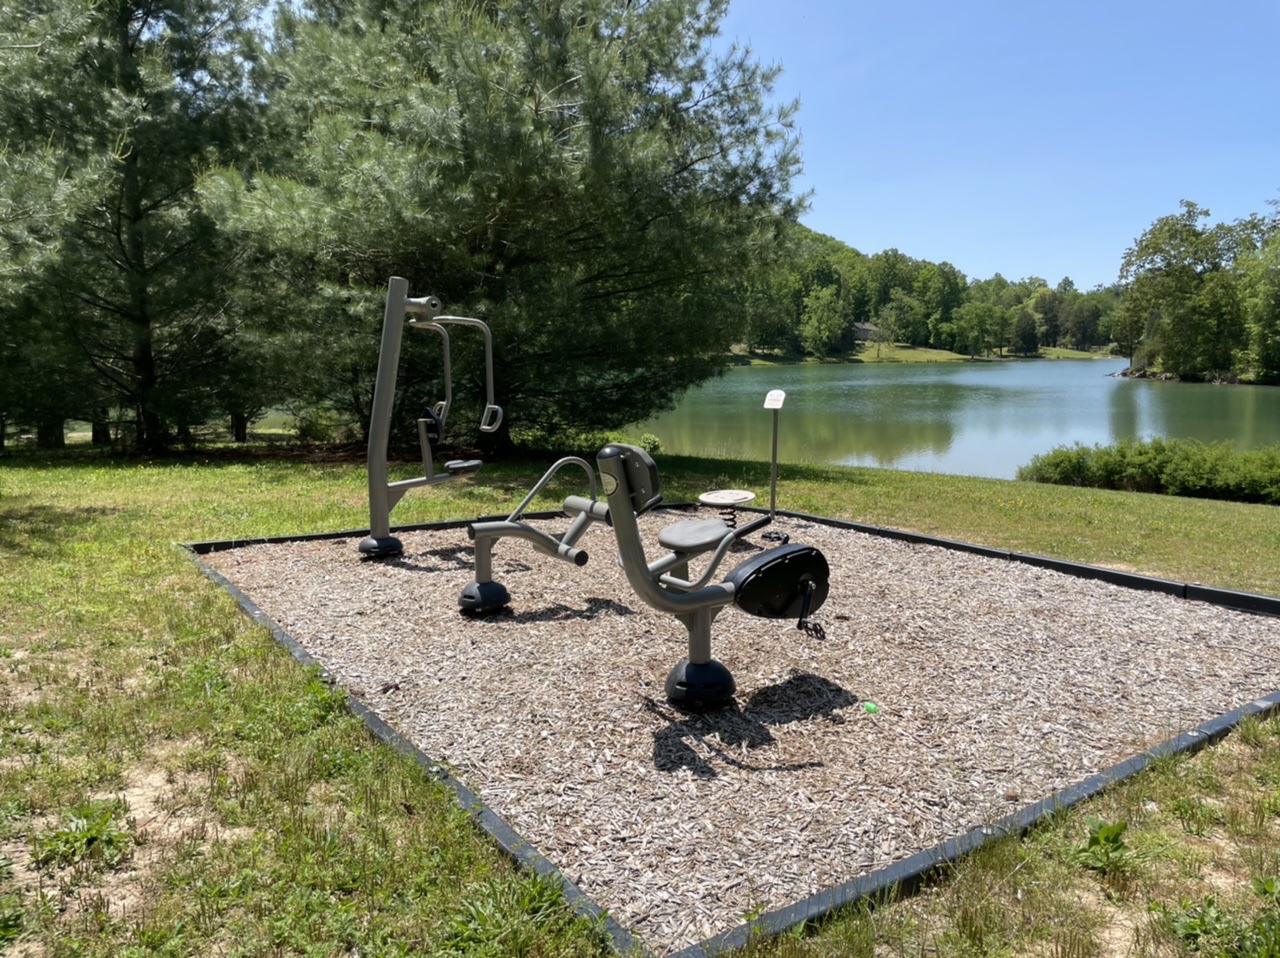 Exercise equipment next to the lake at Big Ridge State Park near Maynardville, Tennessee.  Photo taken by and the property of FourWalls.